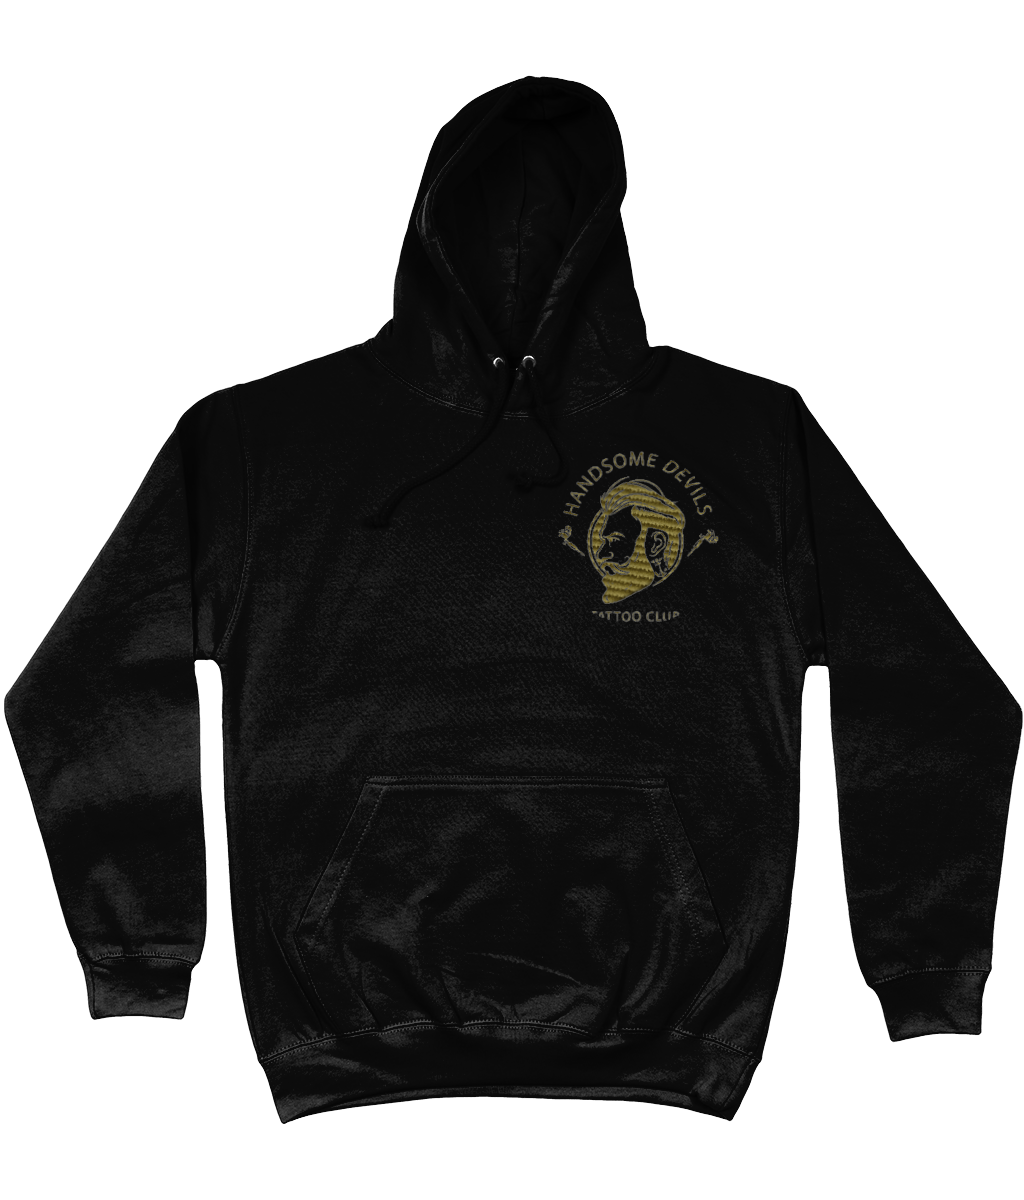 Embroidered Hoodie - Black & Gold